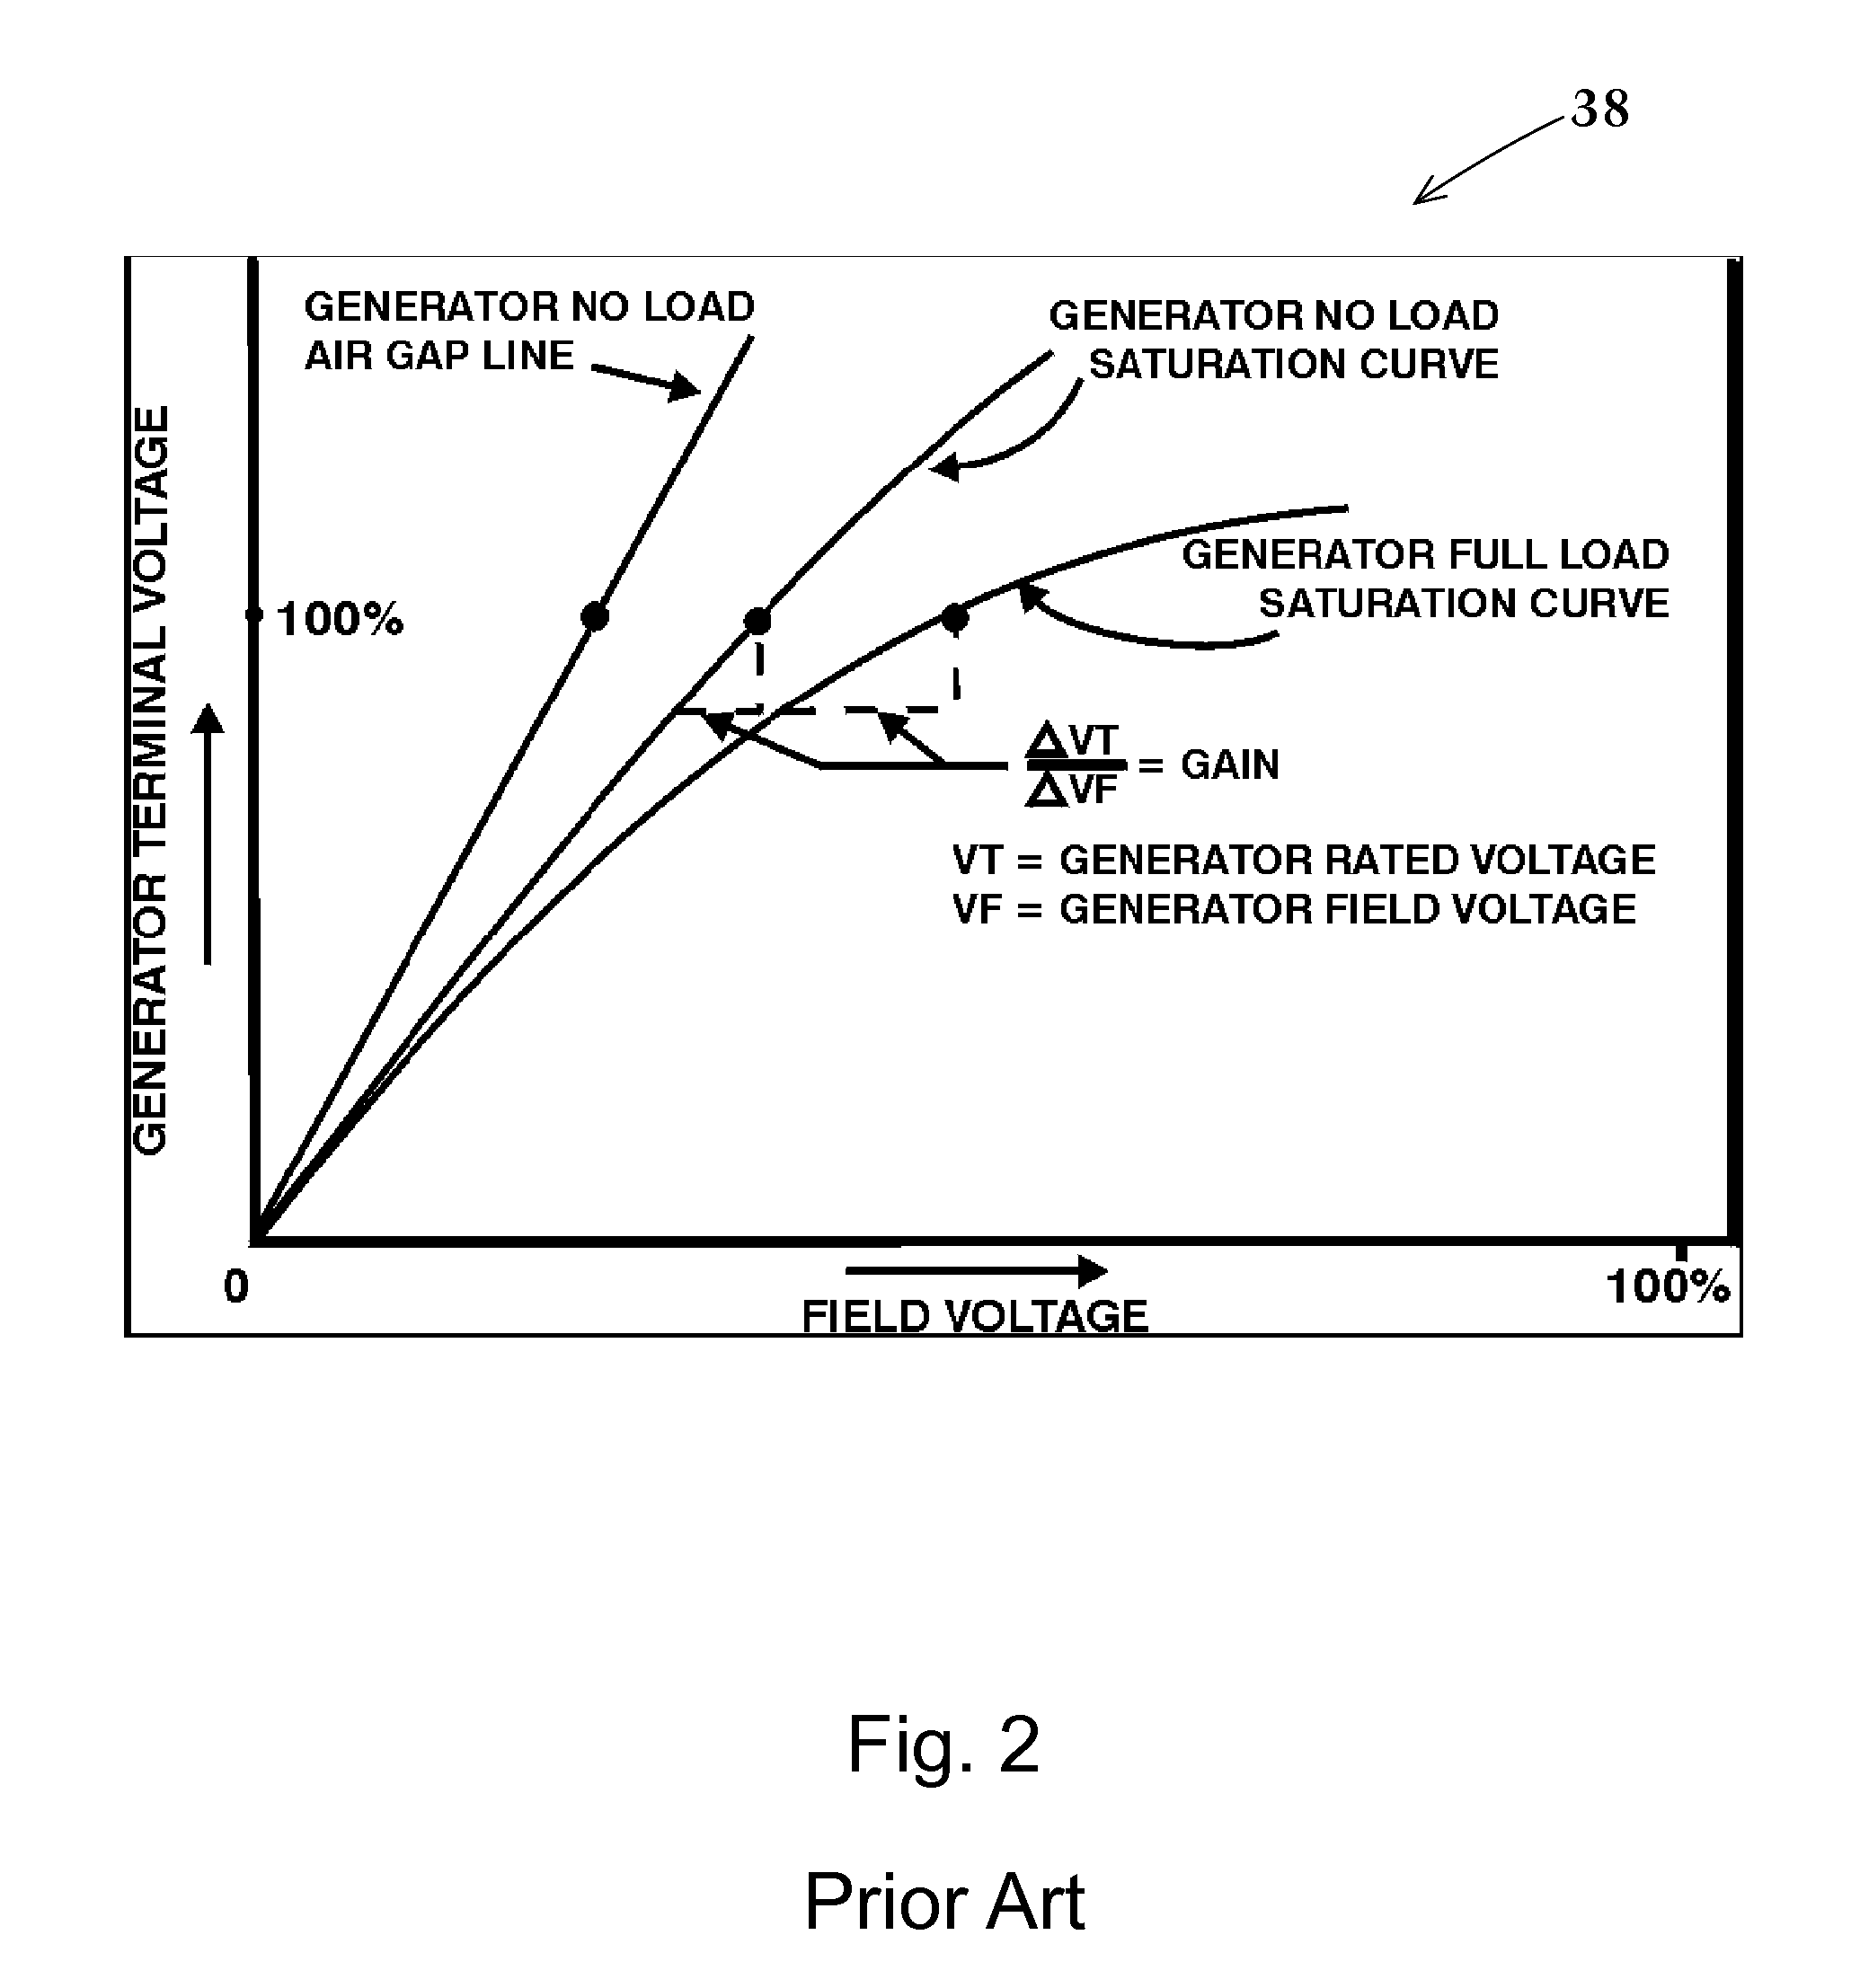 Digital Excitation Control System Utilizing Self-Tuning PID Gains and an Associated Method of Use